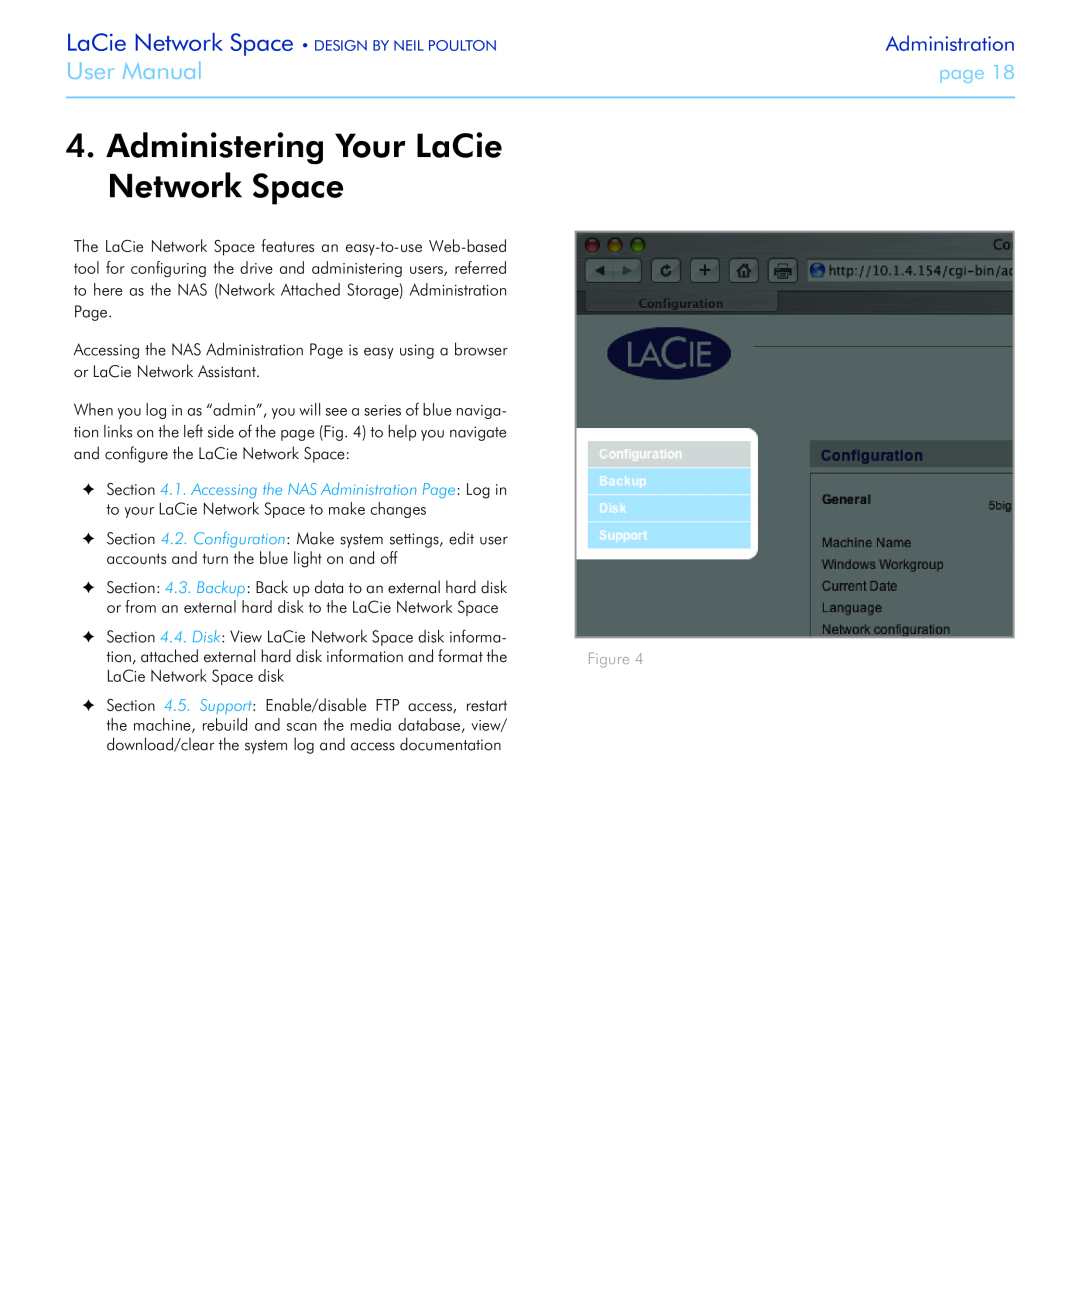 LaCie Administering Your LaCie Network Space, 1. Accessing the NAS Administration Page Log in, User Manual, page 